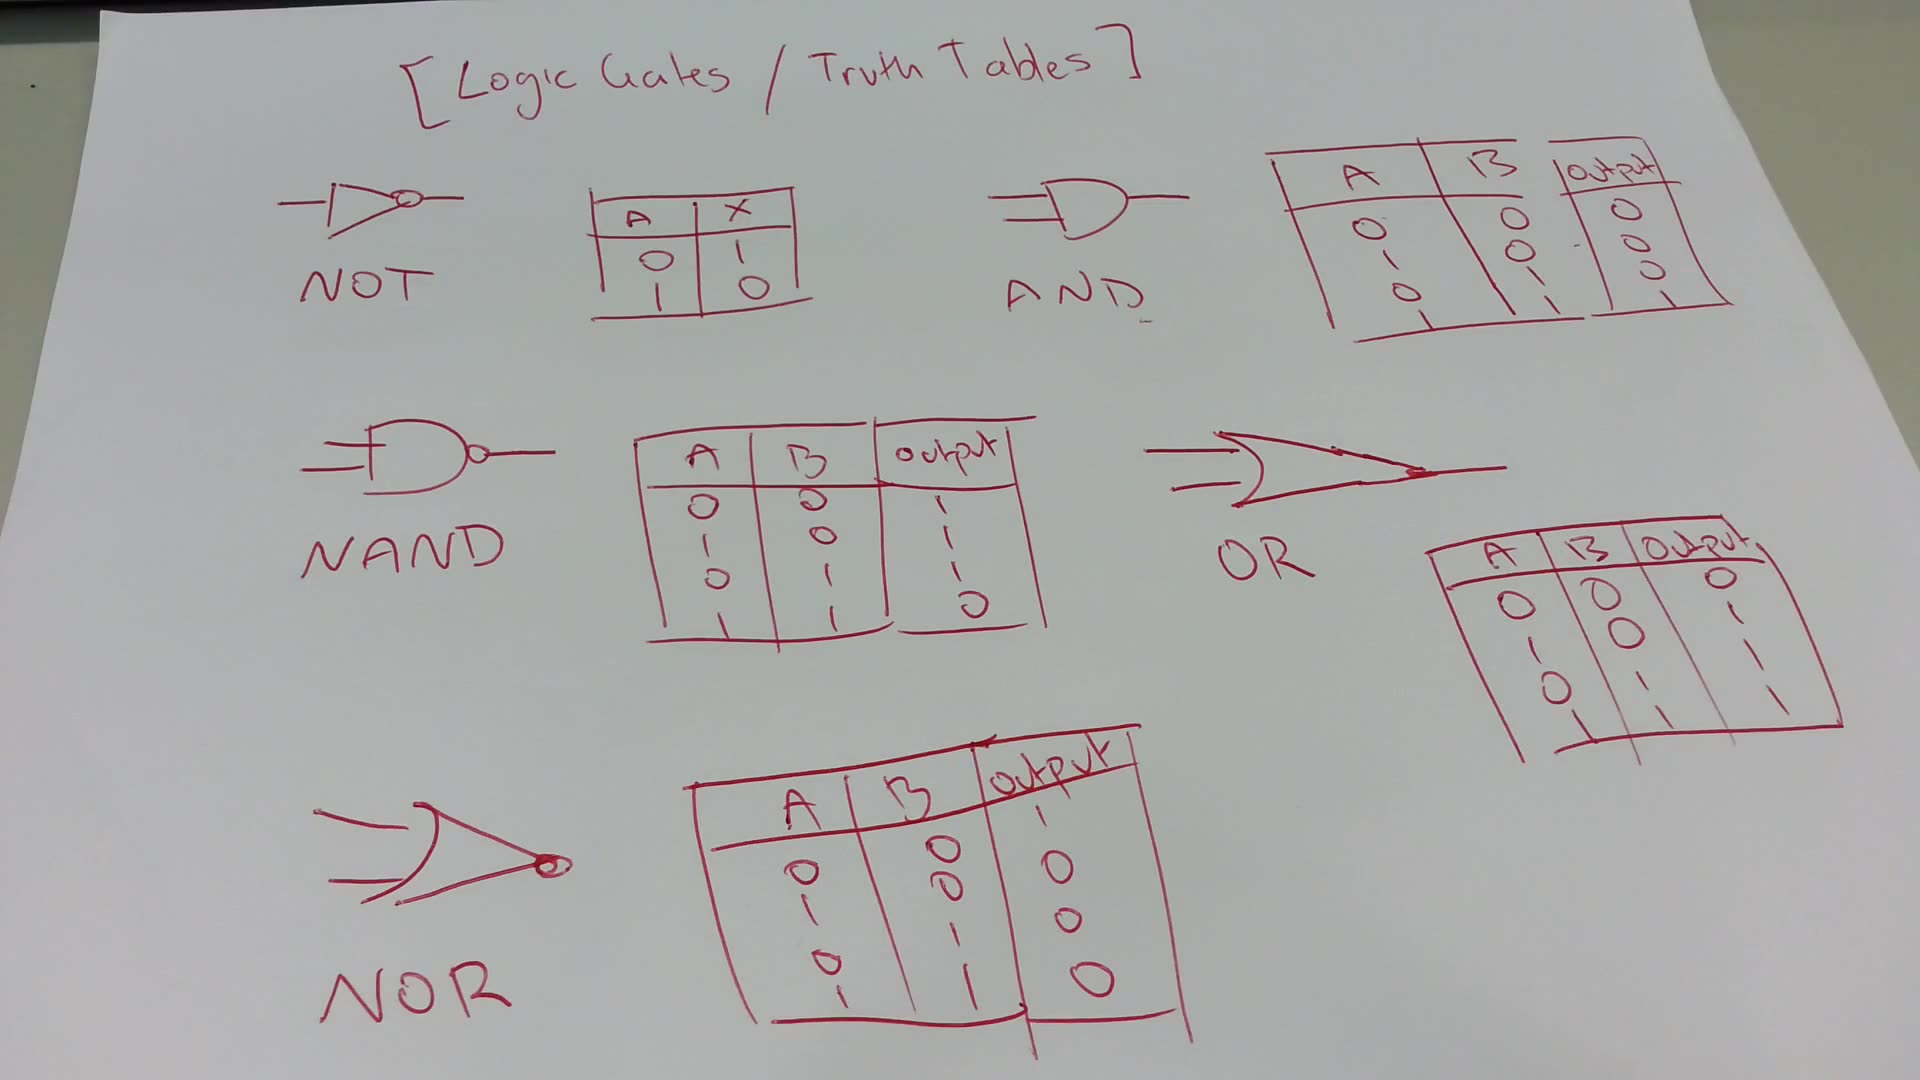 Logic Gates Truth Tables Explained Not And Nand Or Nor